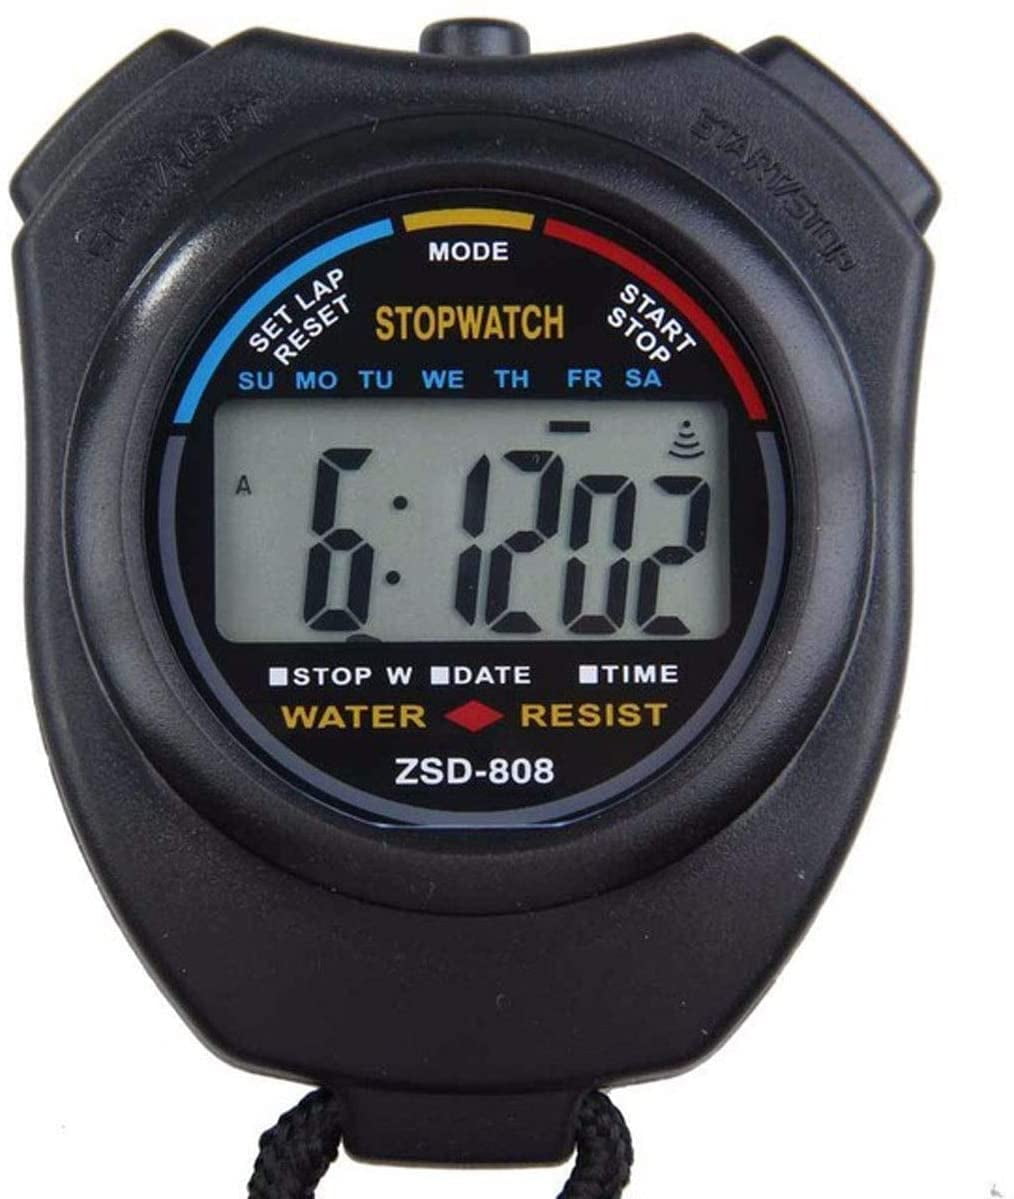 Details about   Large Digital Household Waterproof Timer Sport Stopwatch For Athlete Fitness 